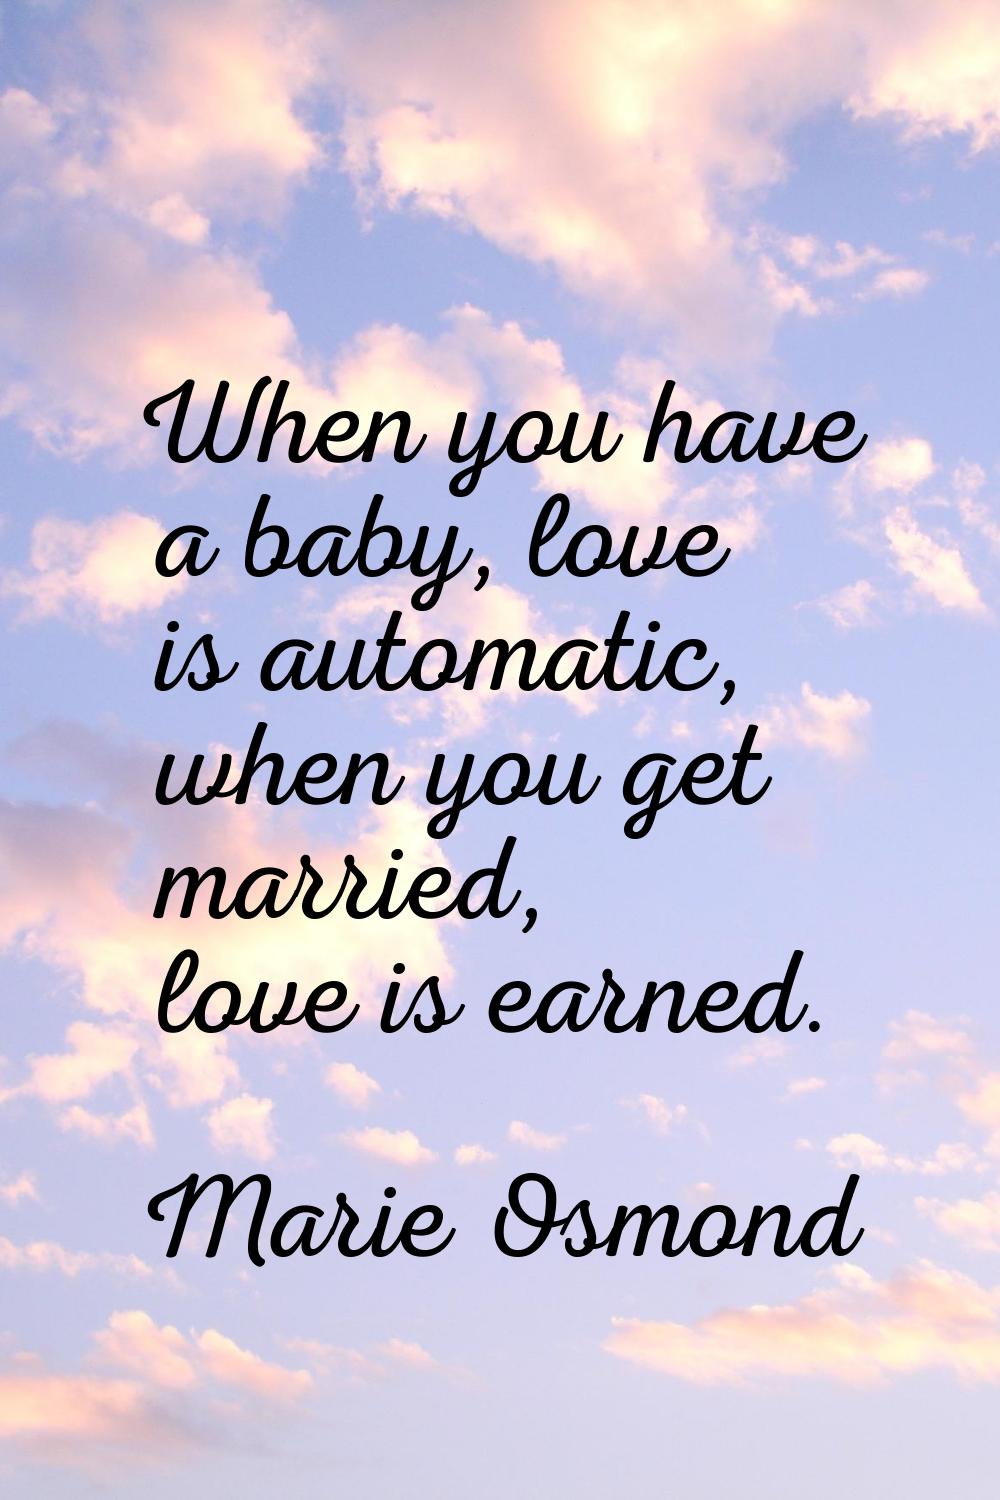 When you have a baby, love is automatic, when you get married, love is earned.